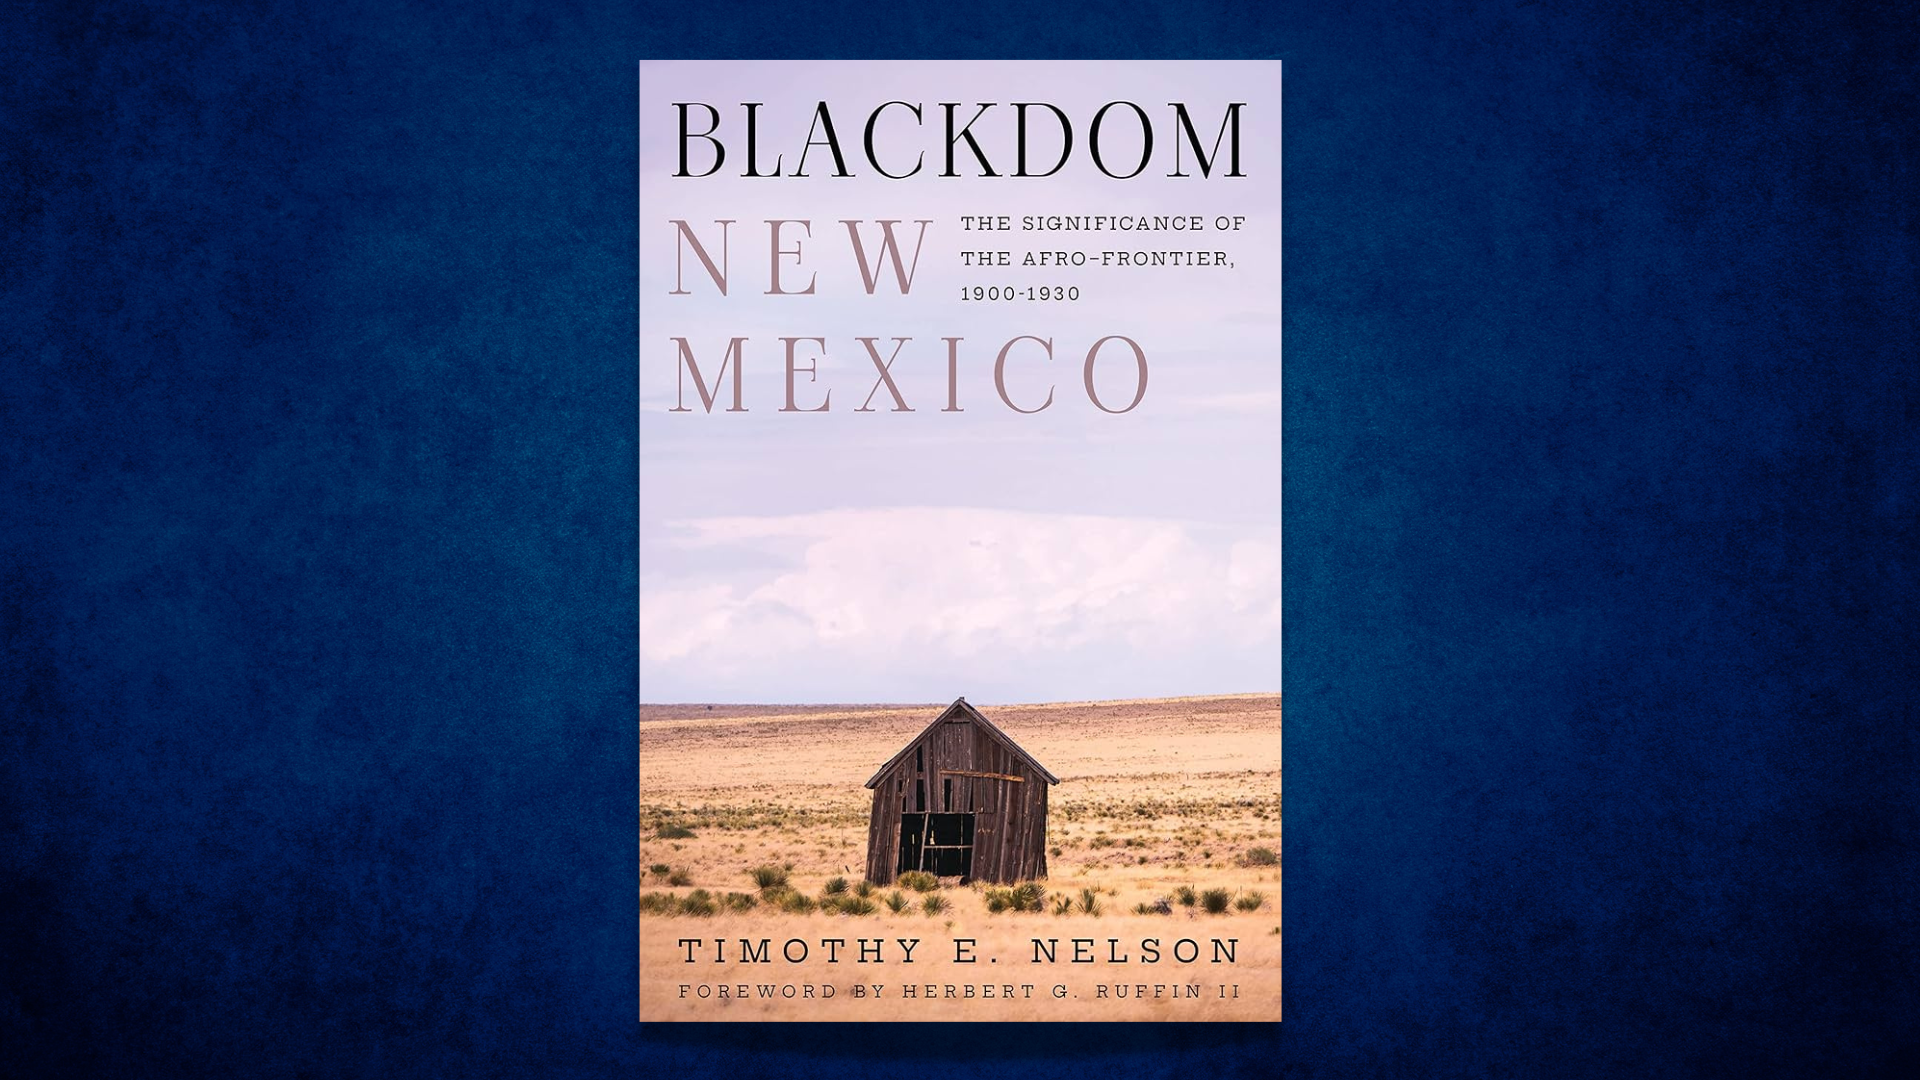 Blackdom, New Mexico: The Significance of the Afro-Frontier, 1900-1930